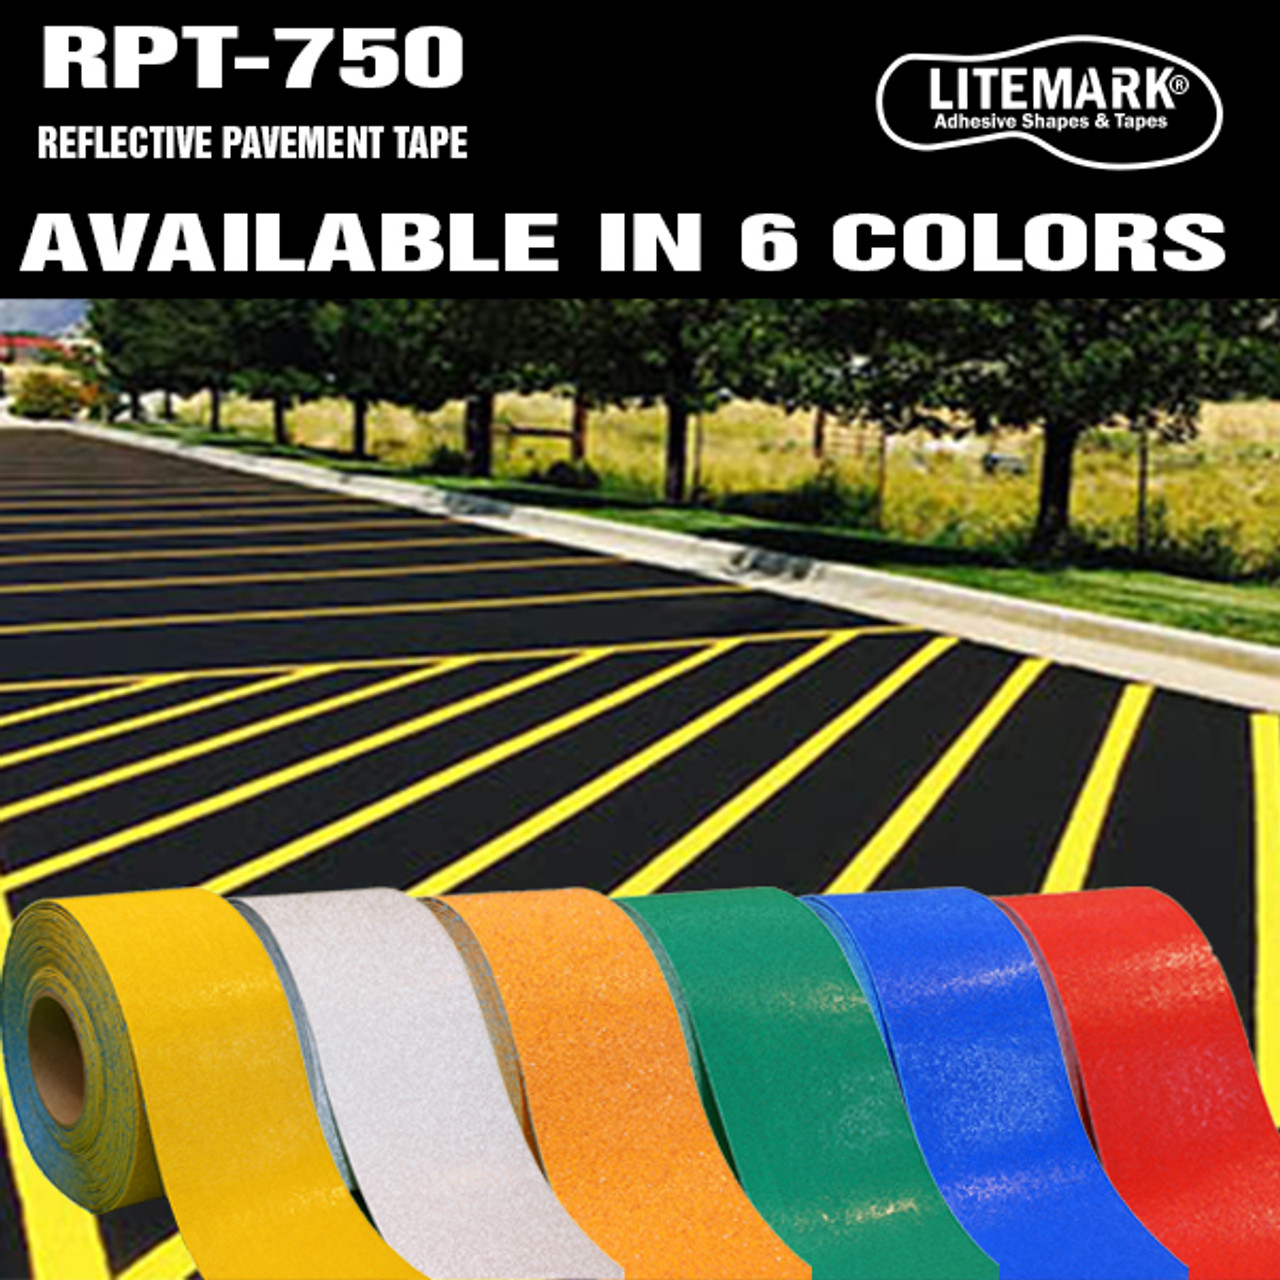 RPT-750 Reflective High Durability Concrete and Pavement Marking Tape